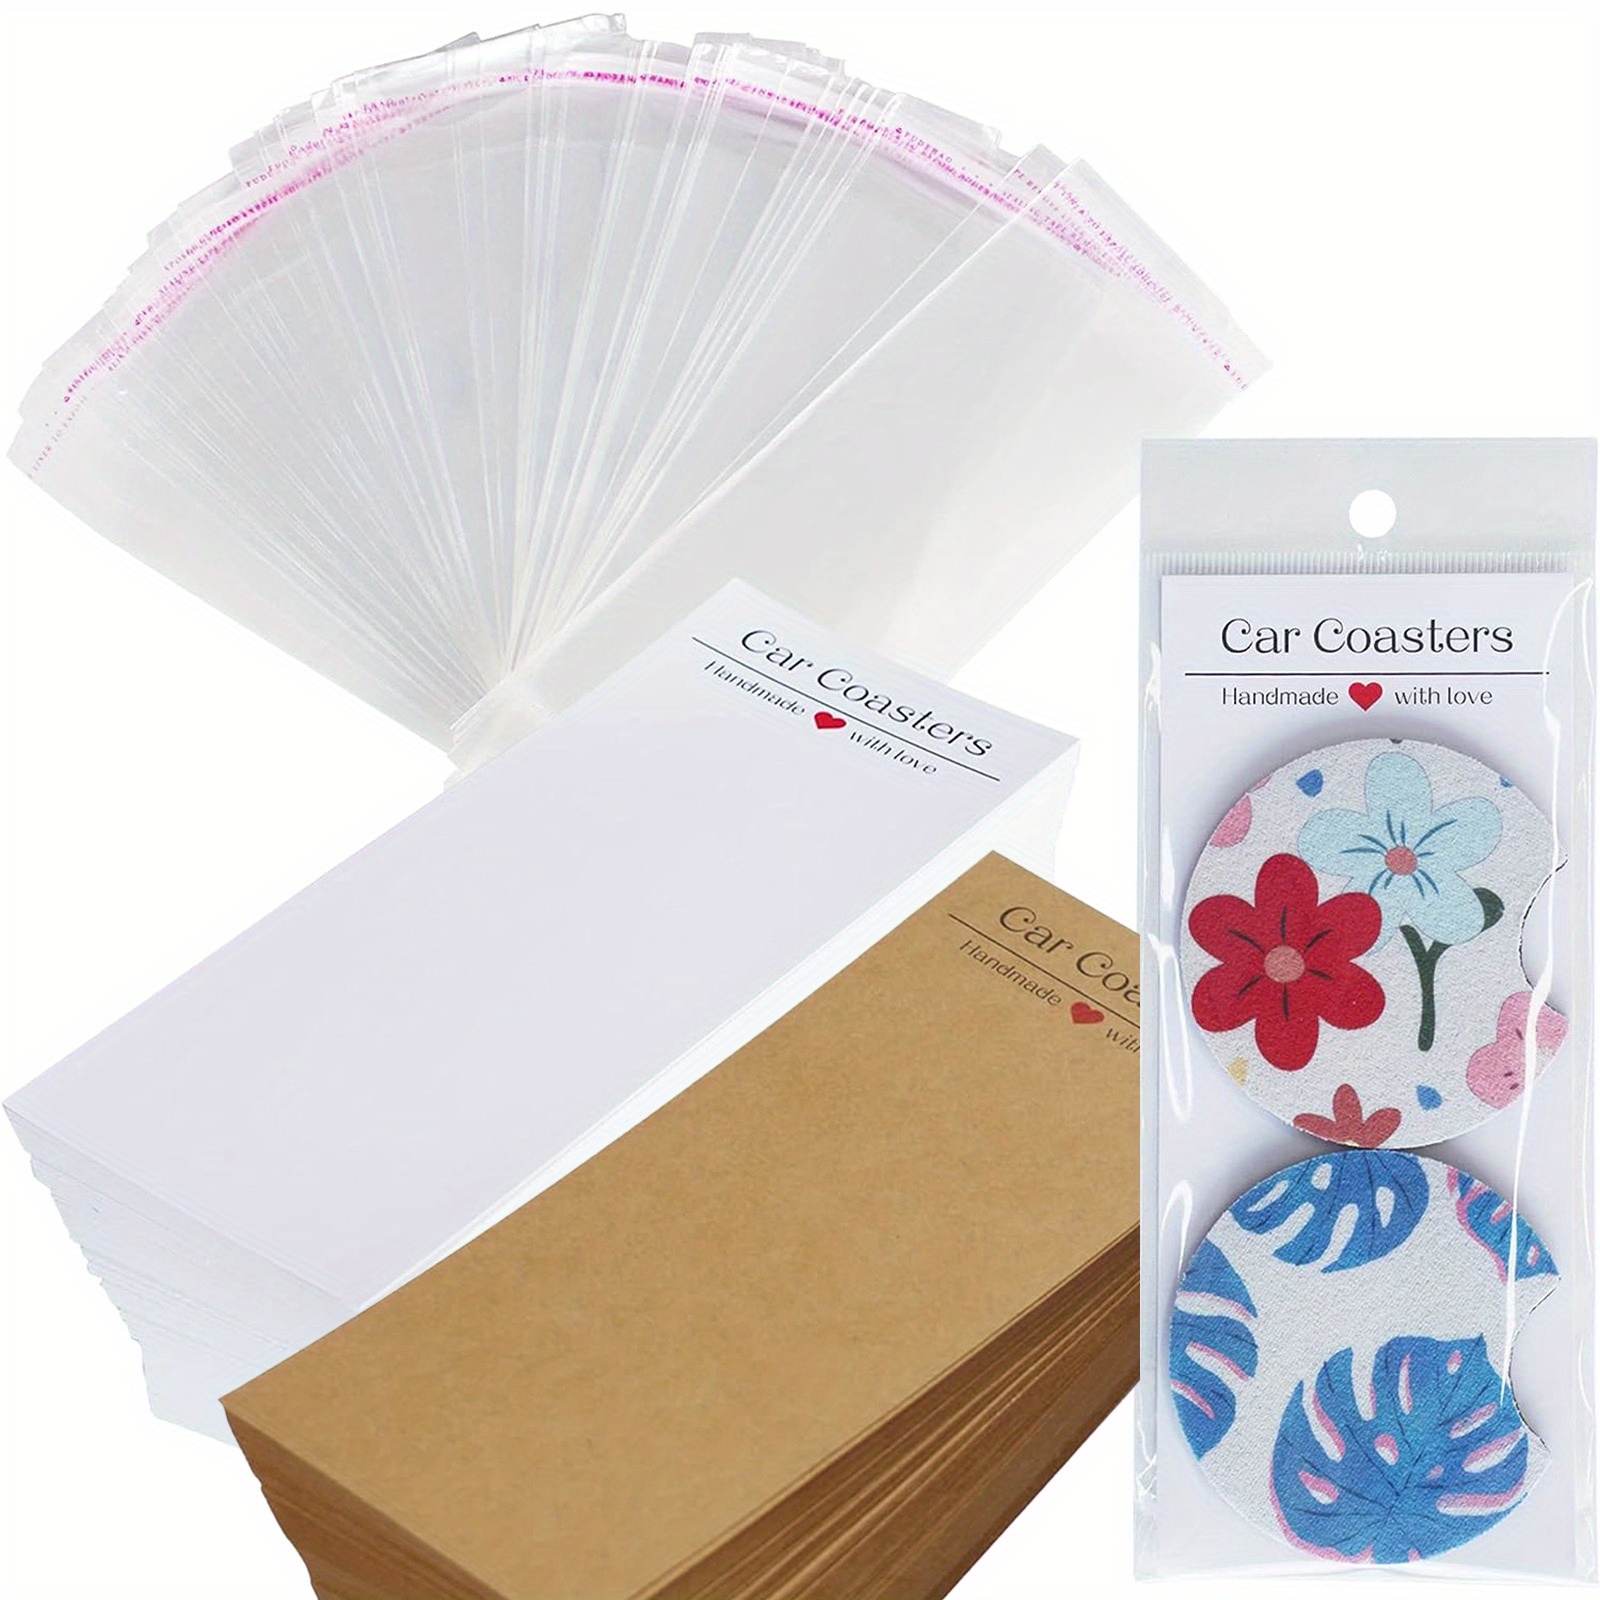 100pcs Car Coaster Packaging For Selling, Sublimation Car Coasters Cards  With 100pcs Bags, Sublimation Accessories